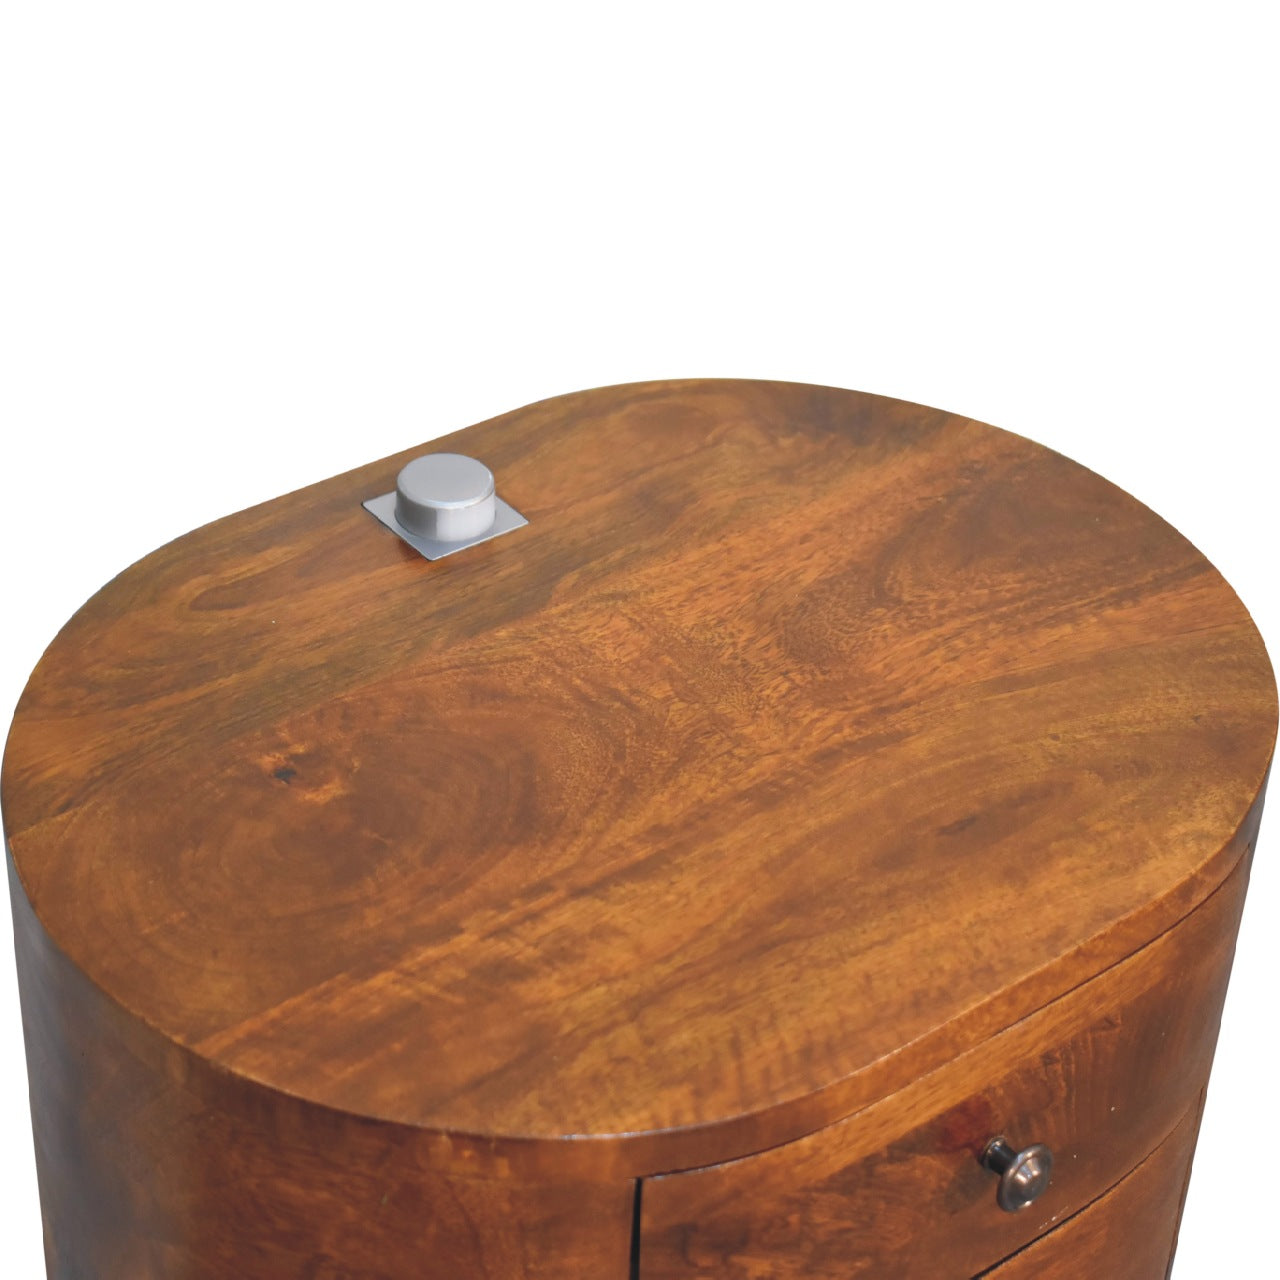 chestnut rounded bedside table with reading light